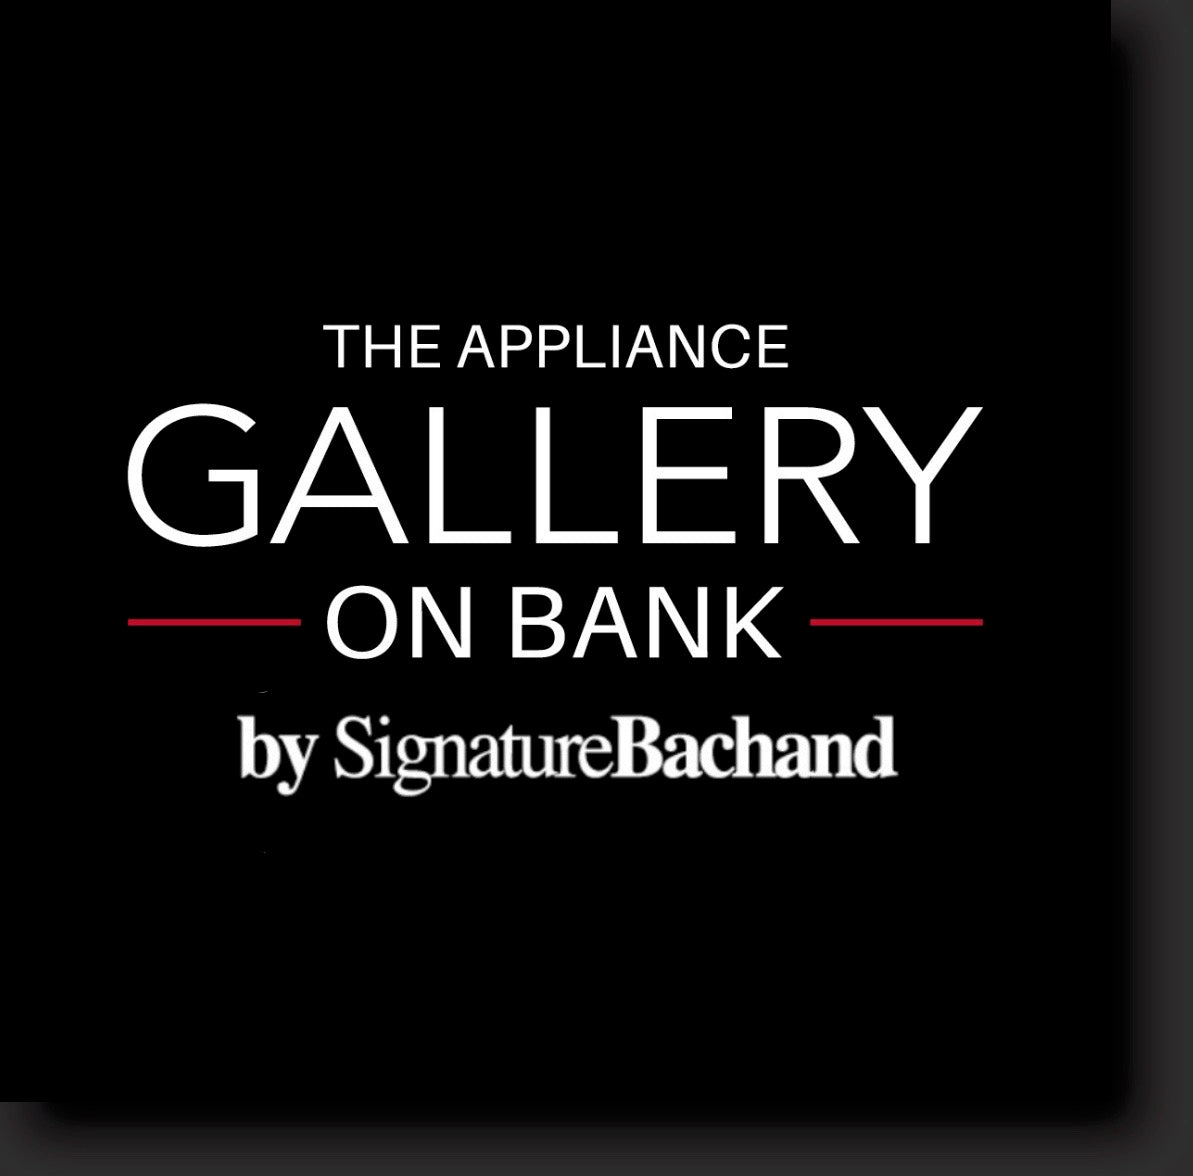 The Appliance Gallery On Bank